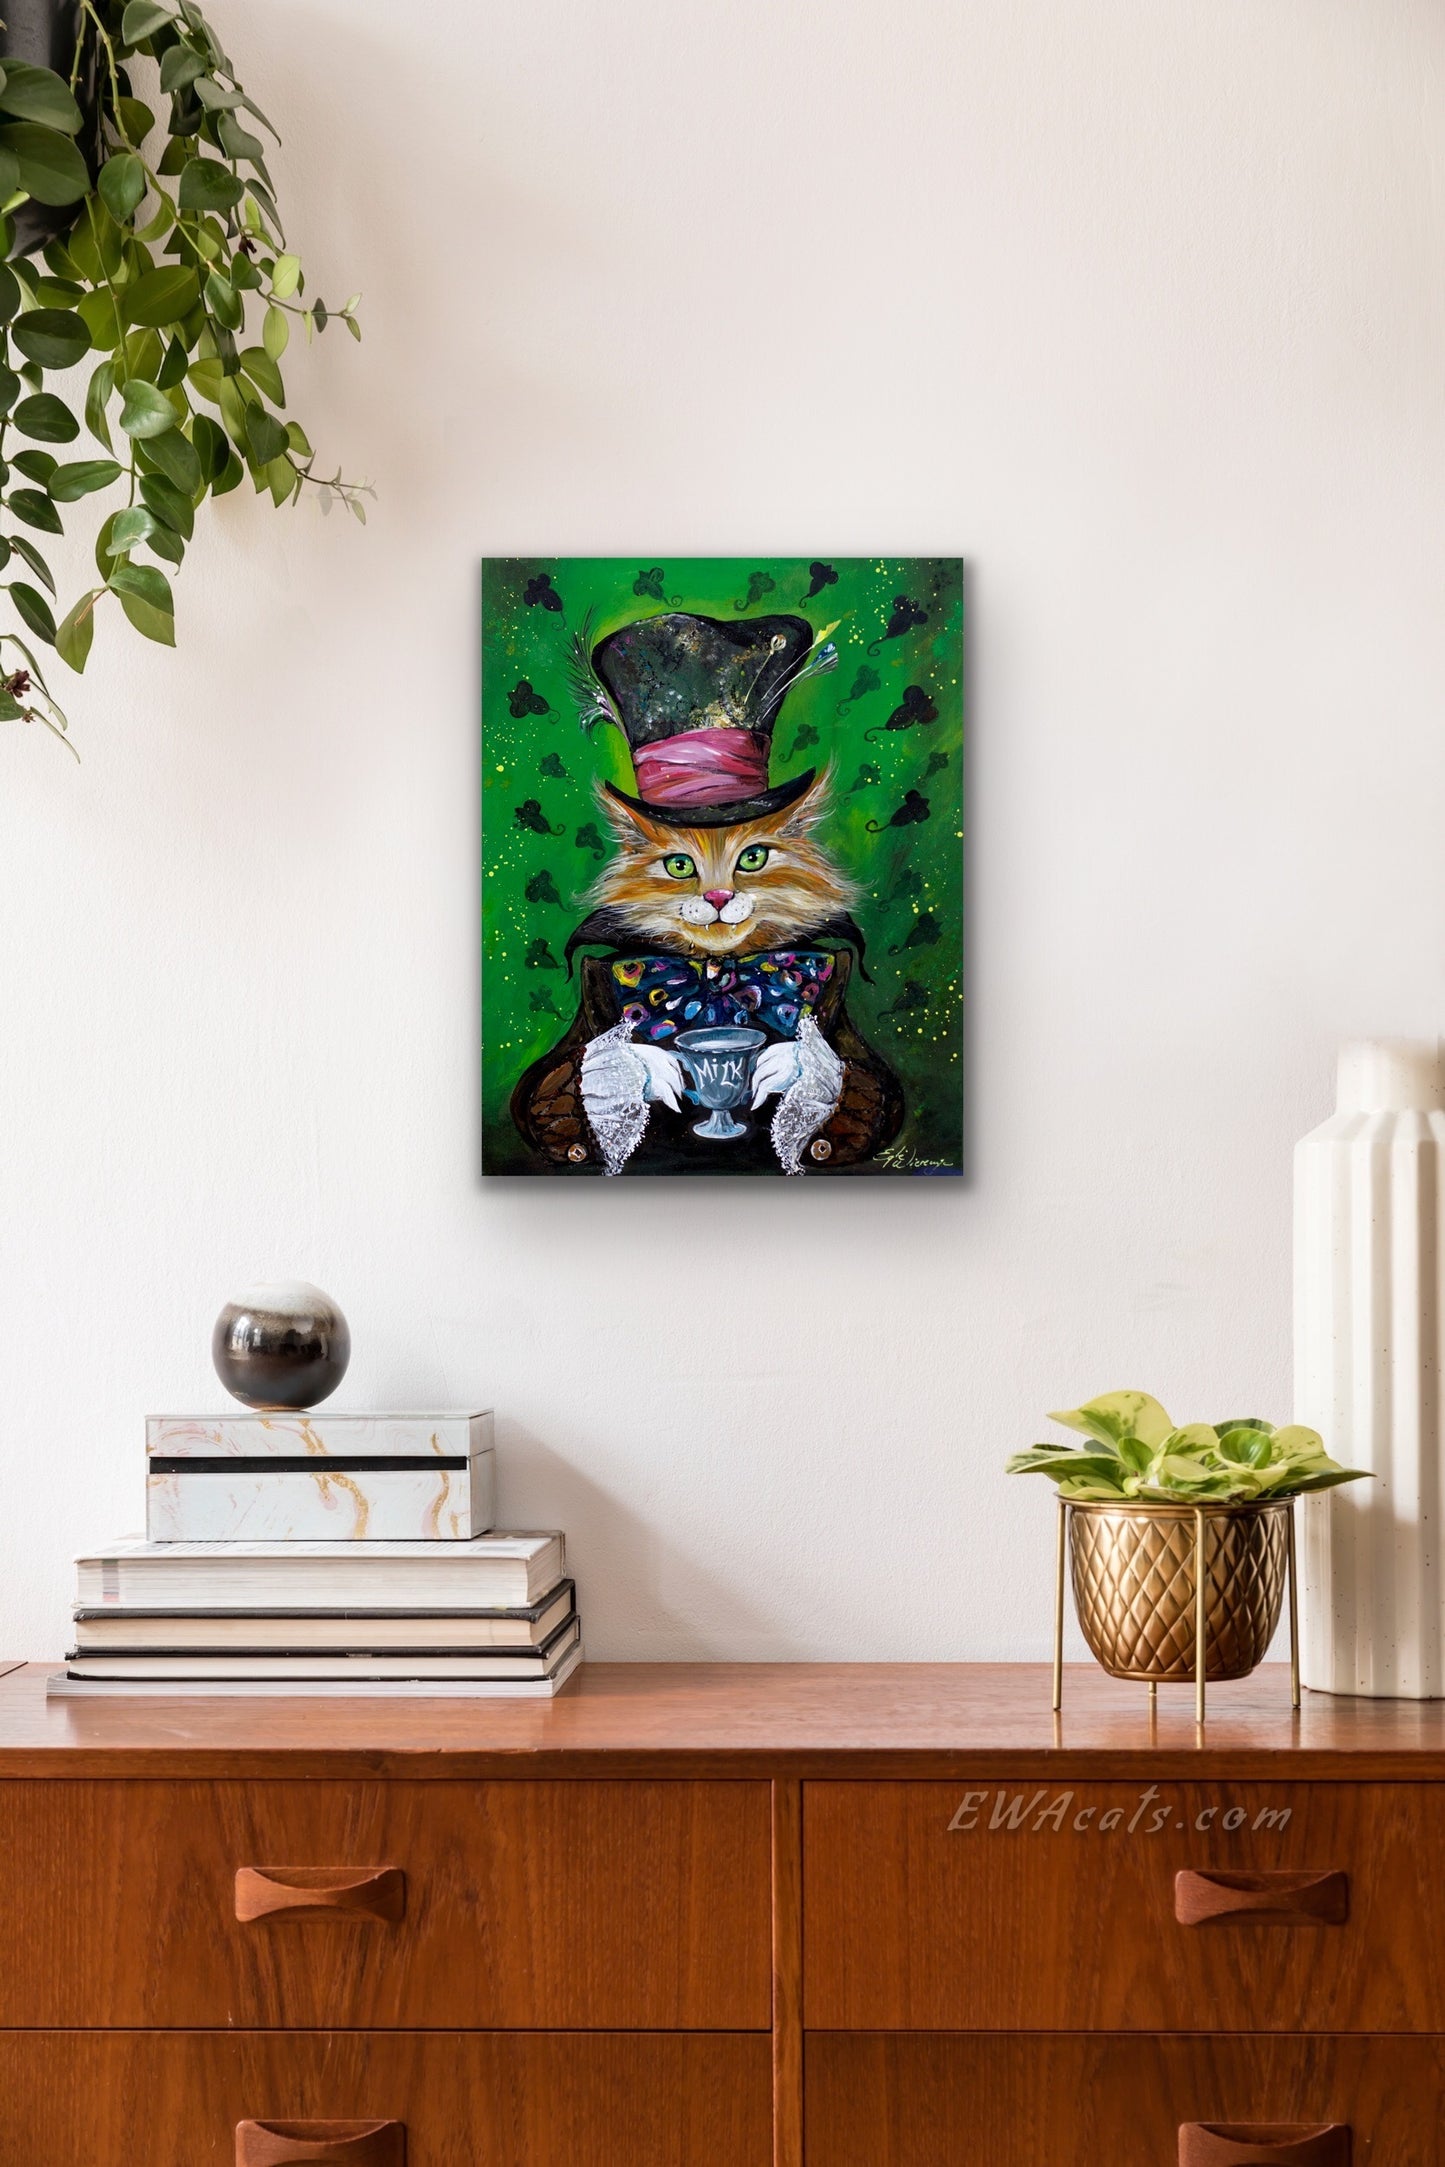 CANVAS "MadCatter" Open & Limited Edition